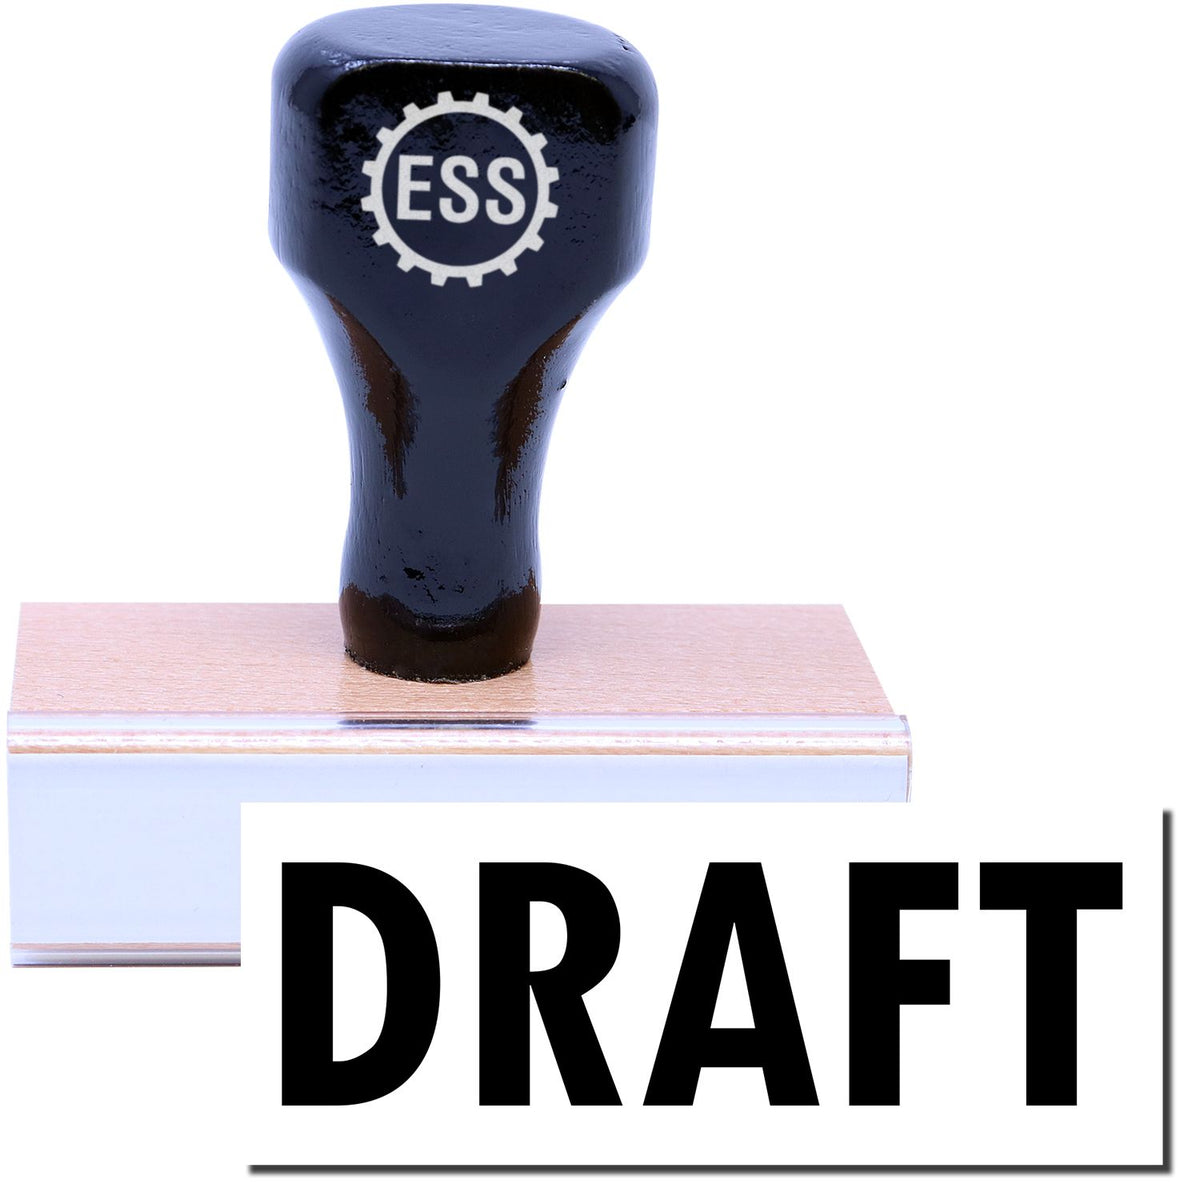 A stock office rubber stamp with a stamped image showing how the text &quot;DRAFT&quot; in a large font is displayed after stamping.